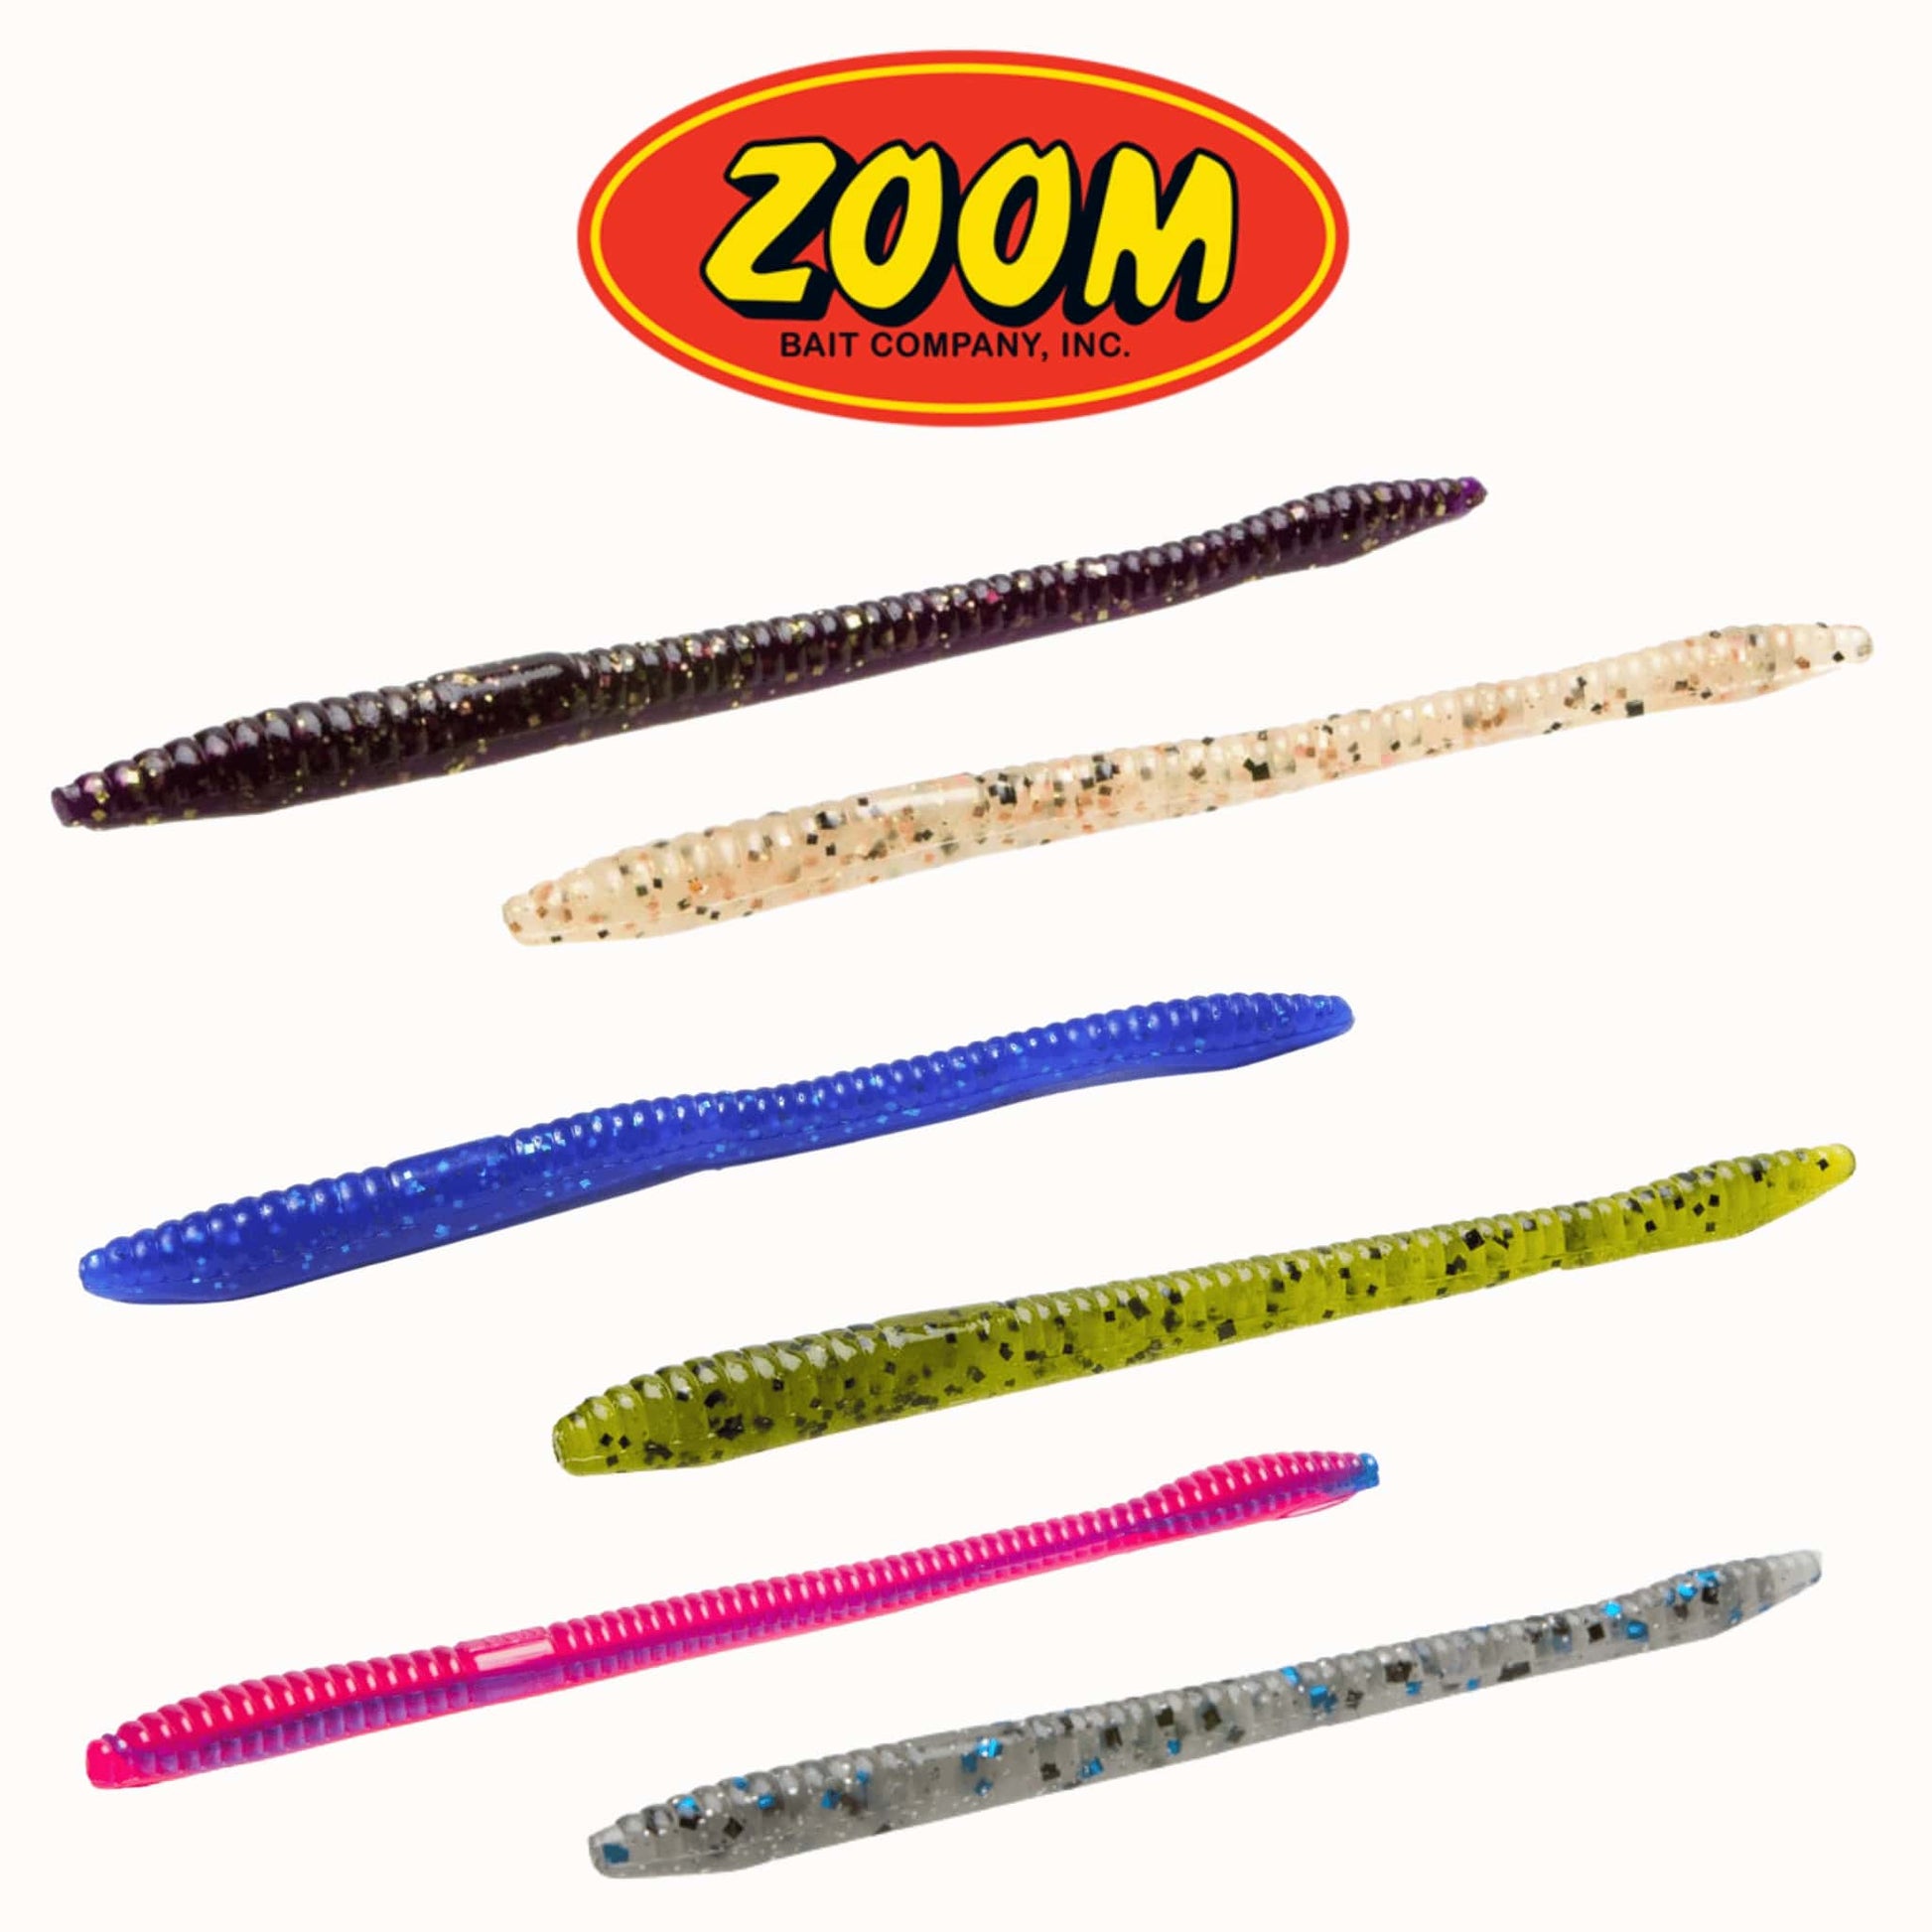 Zoom Italy - ZOOM BAITS. NOW IN ITALY.